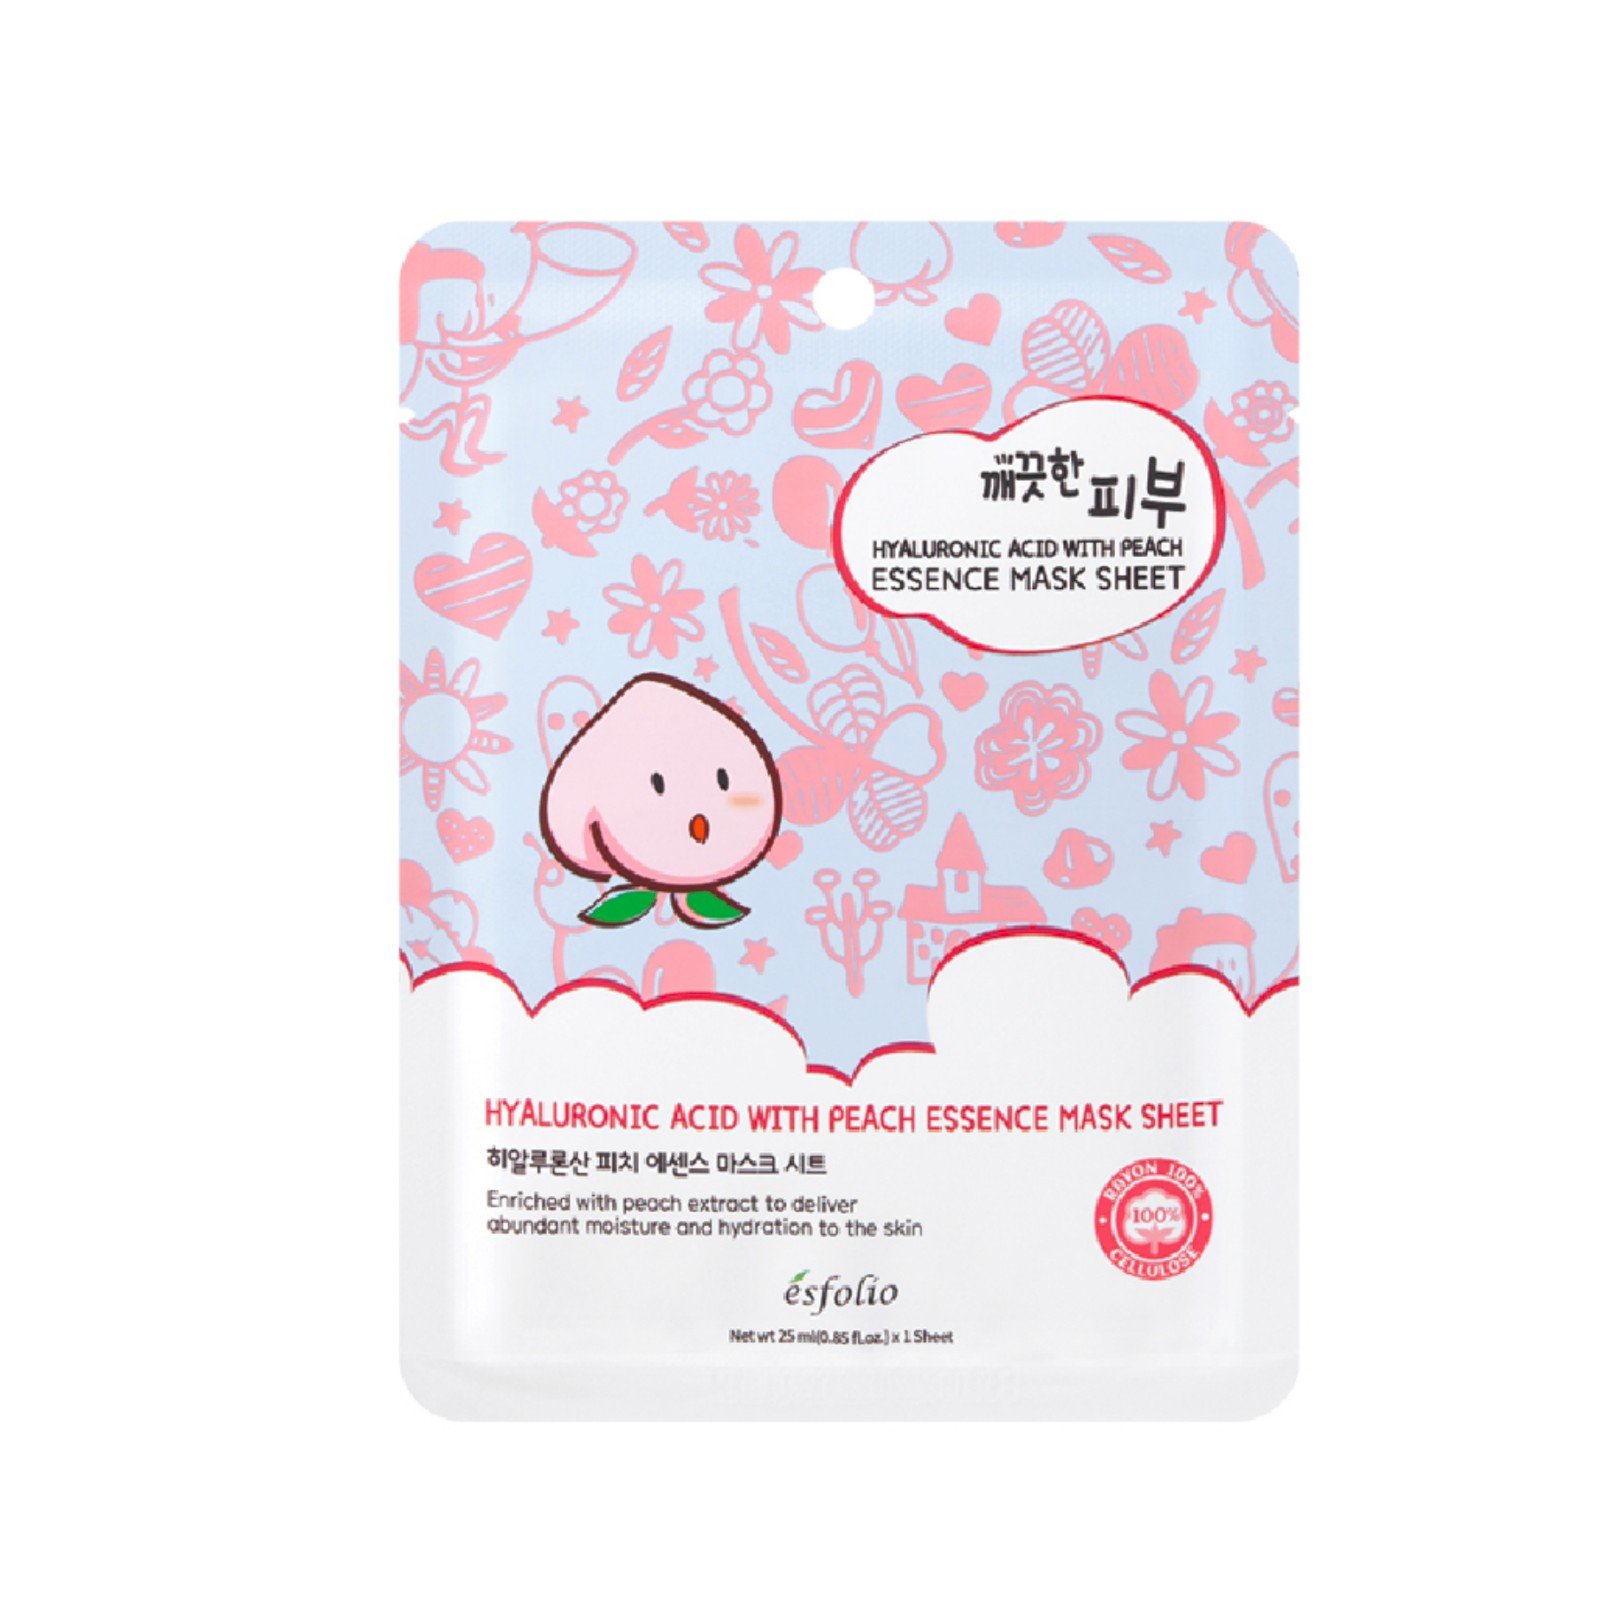 PURE SKIN HYALURONIC ACID WITH PEACH ESSENCE MASK SHEET